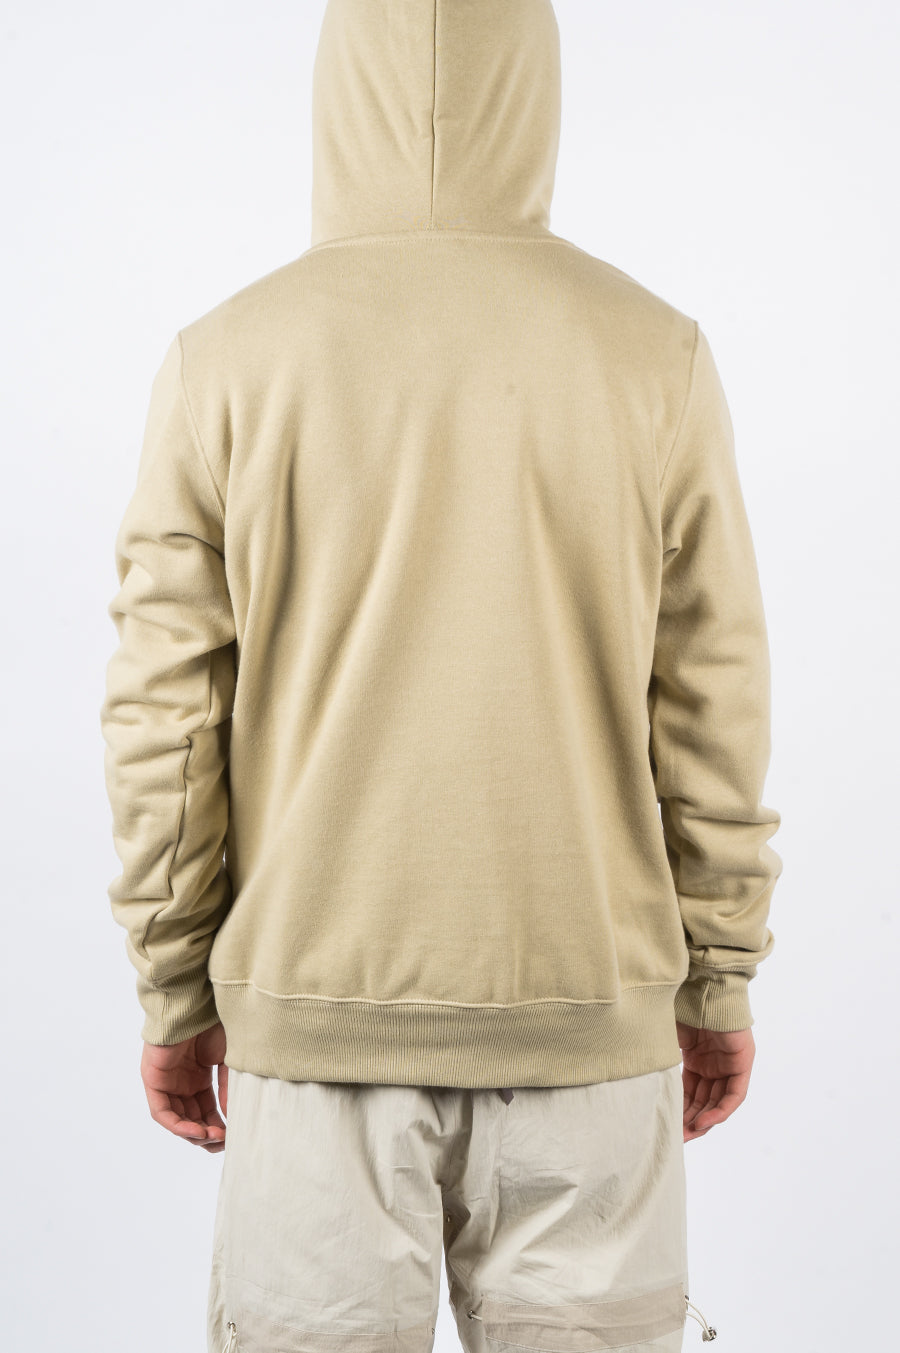 THE NORTH FACE HALF DOME PULLOVER HOODIE BEIGE - BLENDS